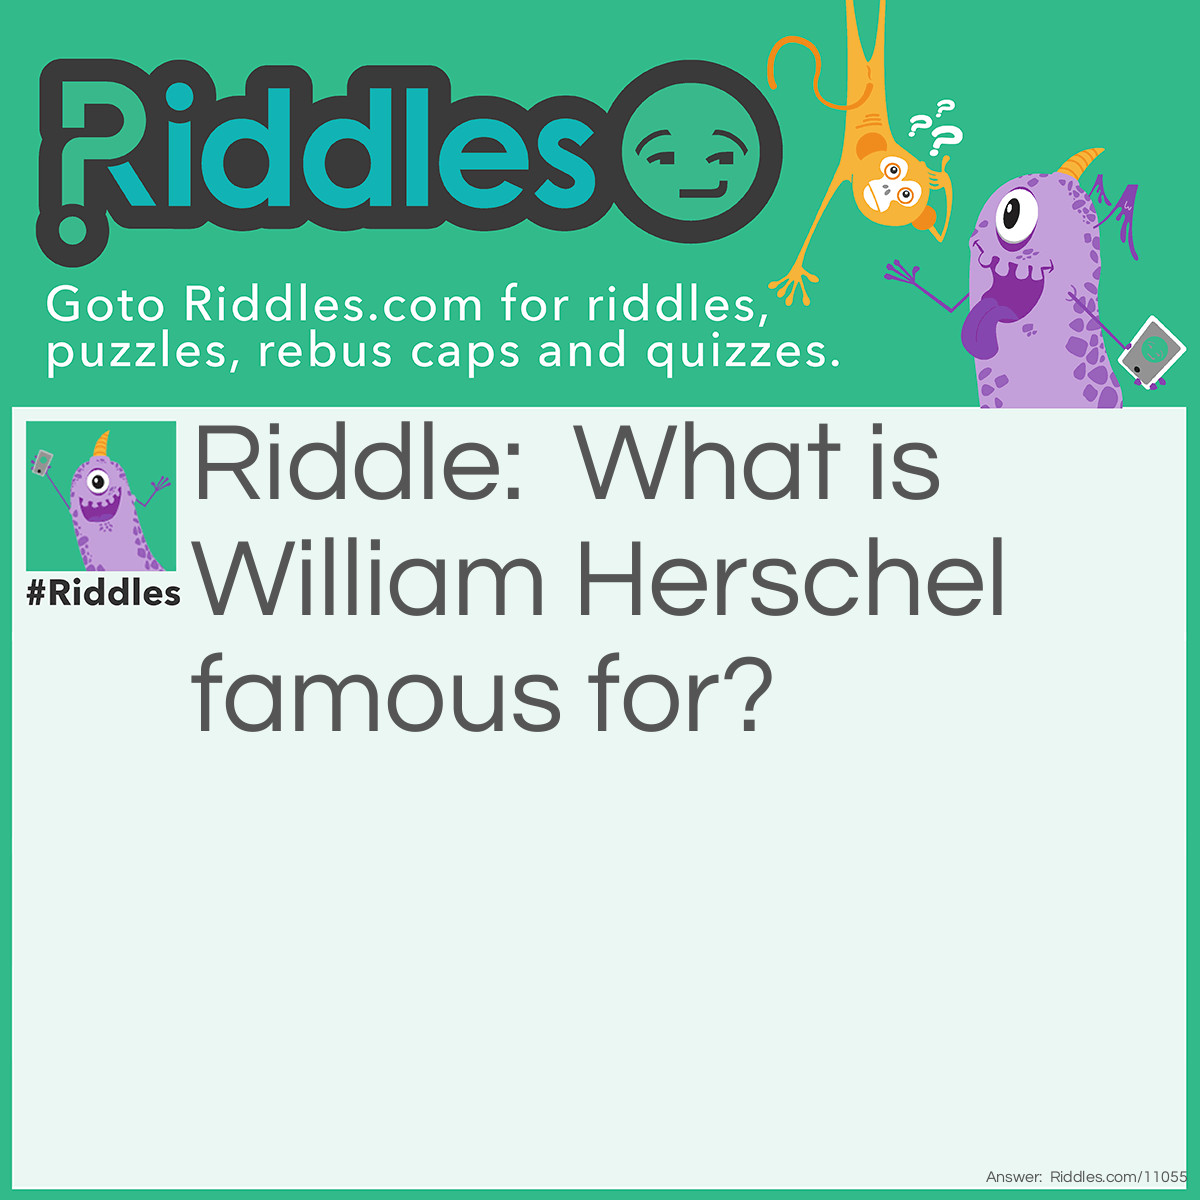 Riddle: What is William Herschel famous for? Answer: He saw Uranus.